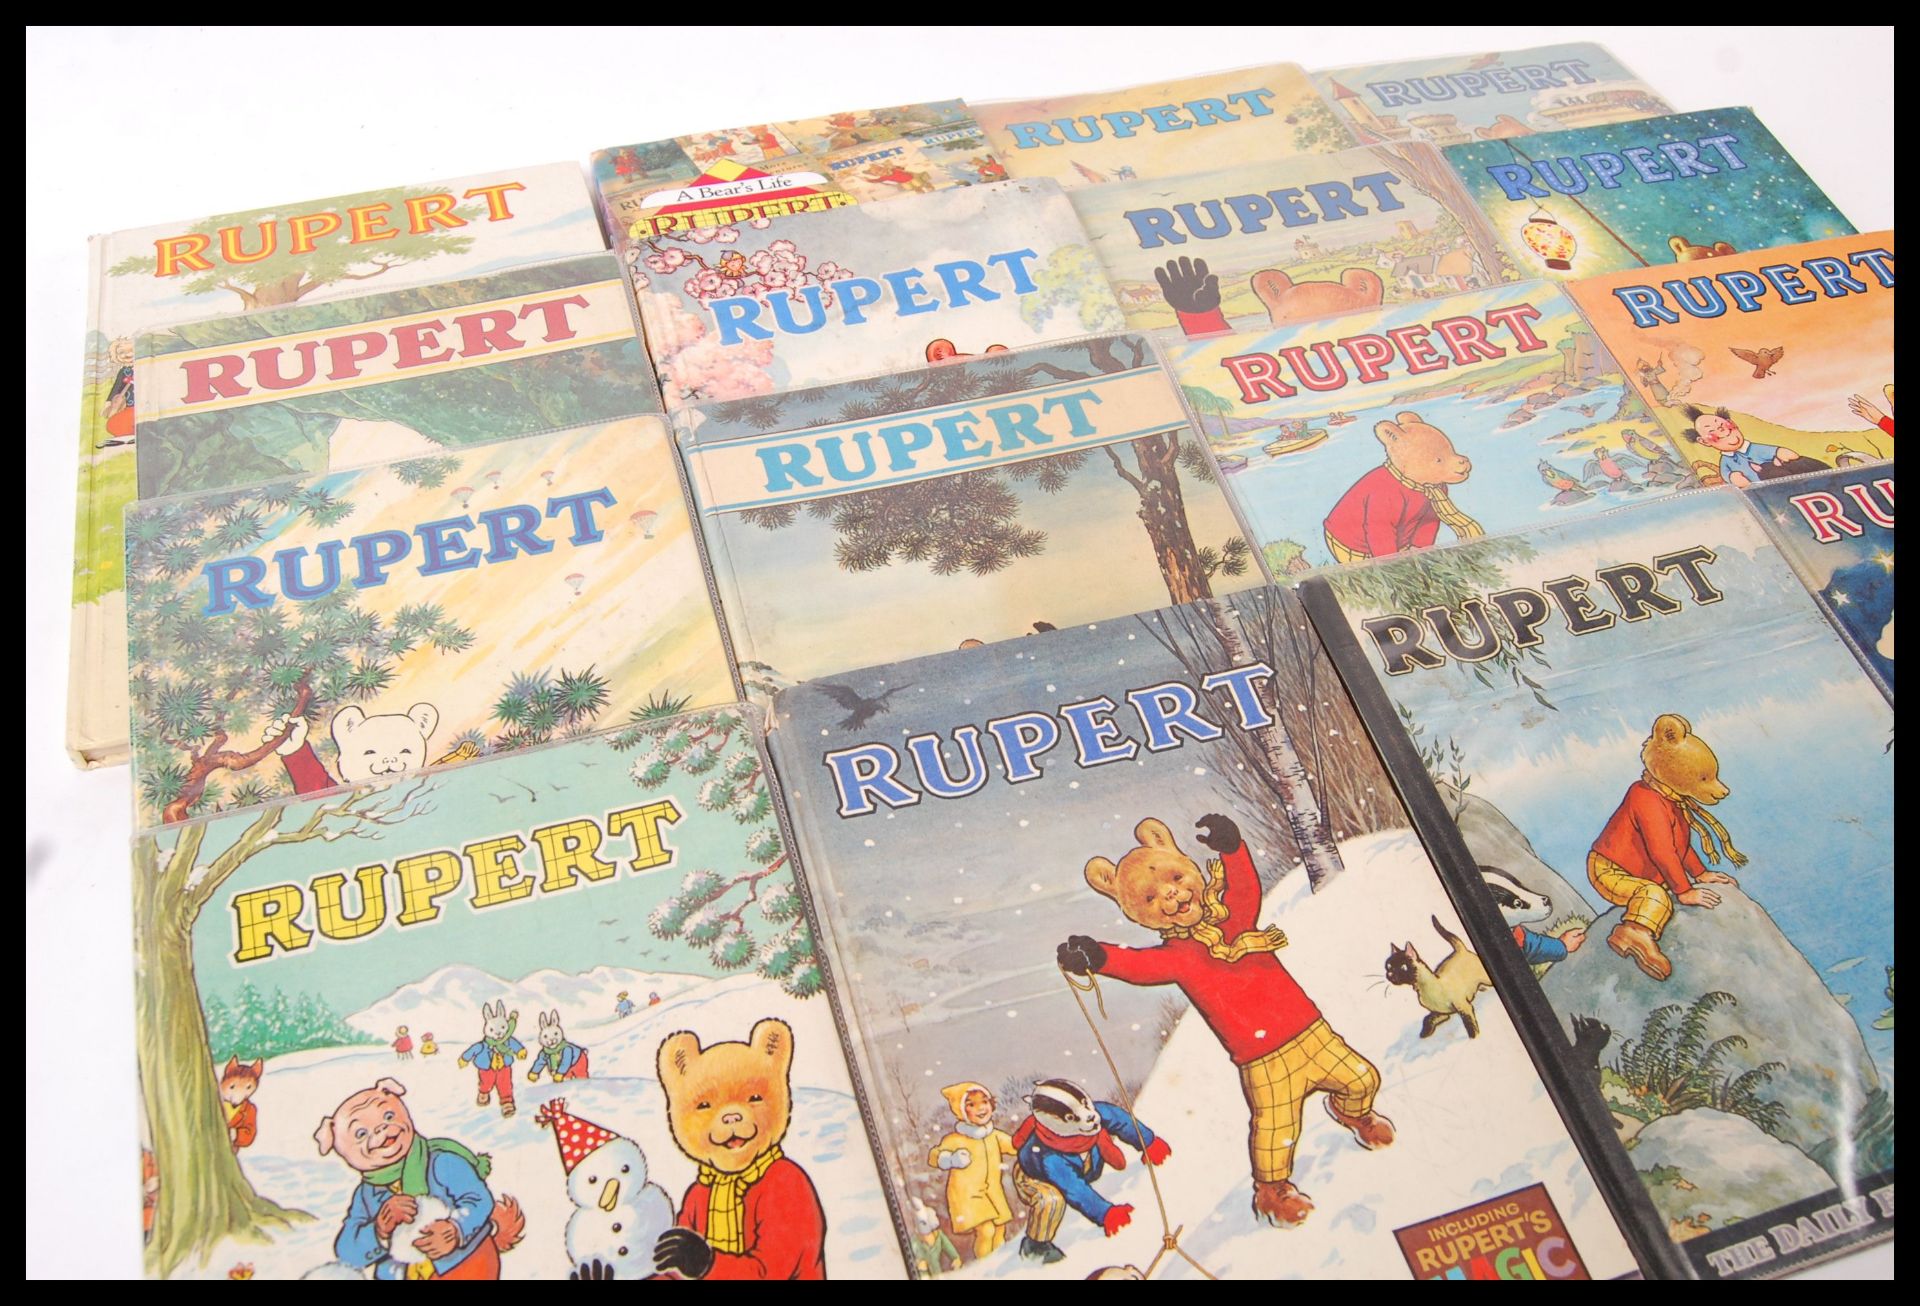 VINTAGE 1960'S / 70'S RUPERT HARDBACK DAILY EXPRESS ANNUALS - Image 5 of 6